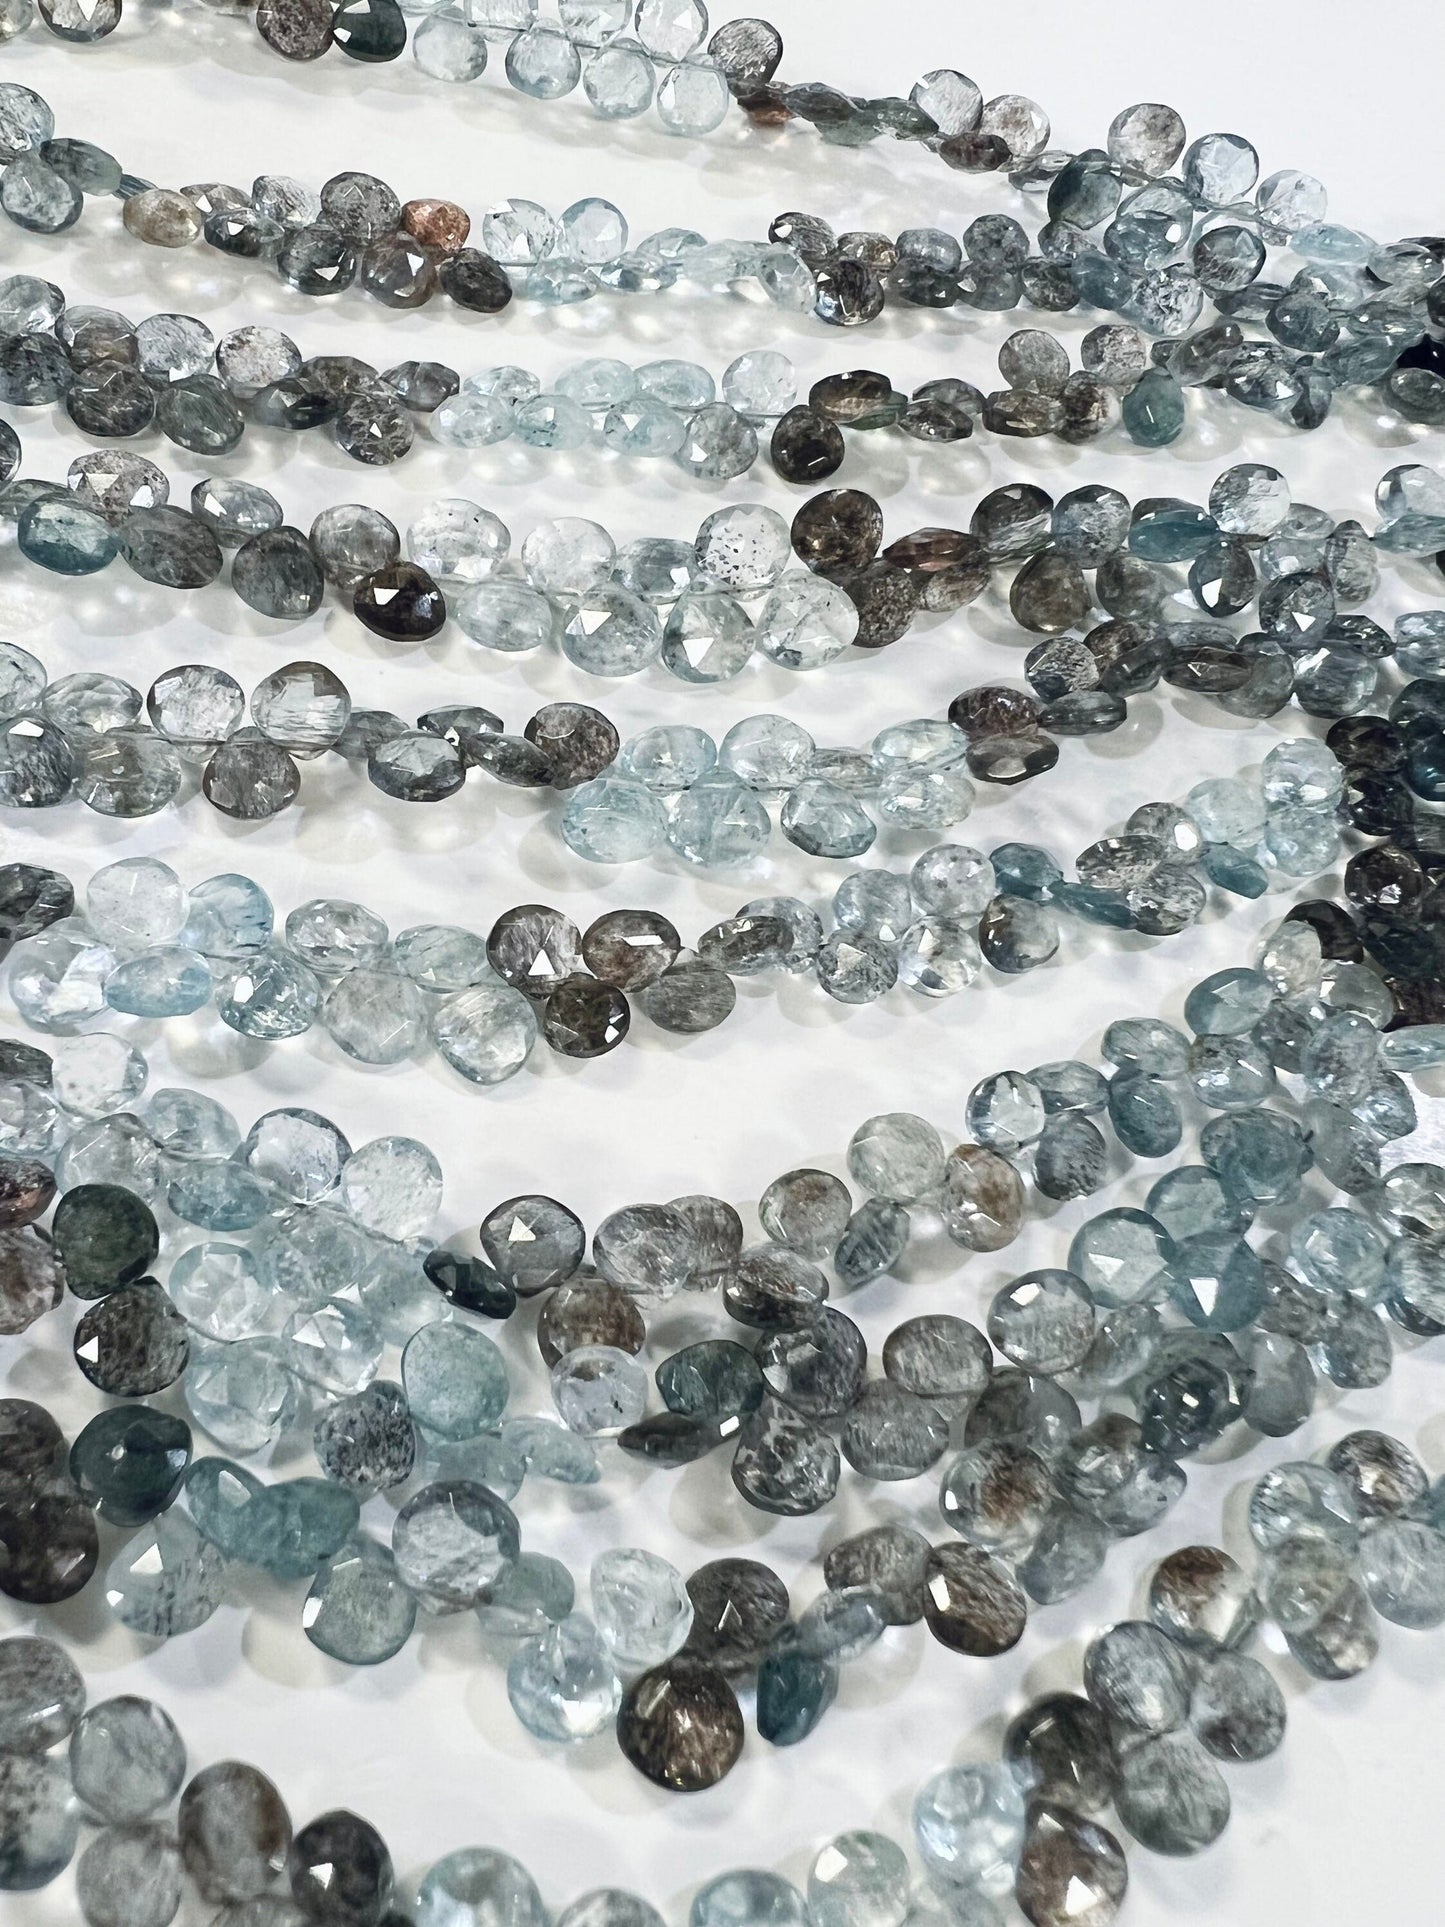 Natural Moss Aquamarine Faceted Heart Shape Briolette Drop 5-6.75mm Jewelry Making Beads 4”(approx. 33 pcs) and 8”(approx. 66 pcs) Strand